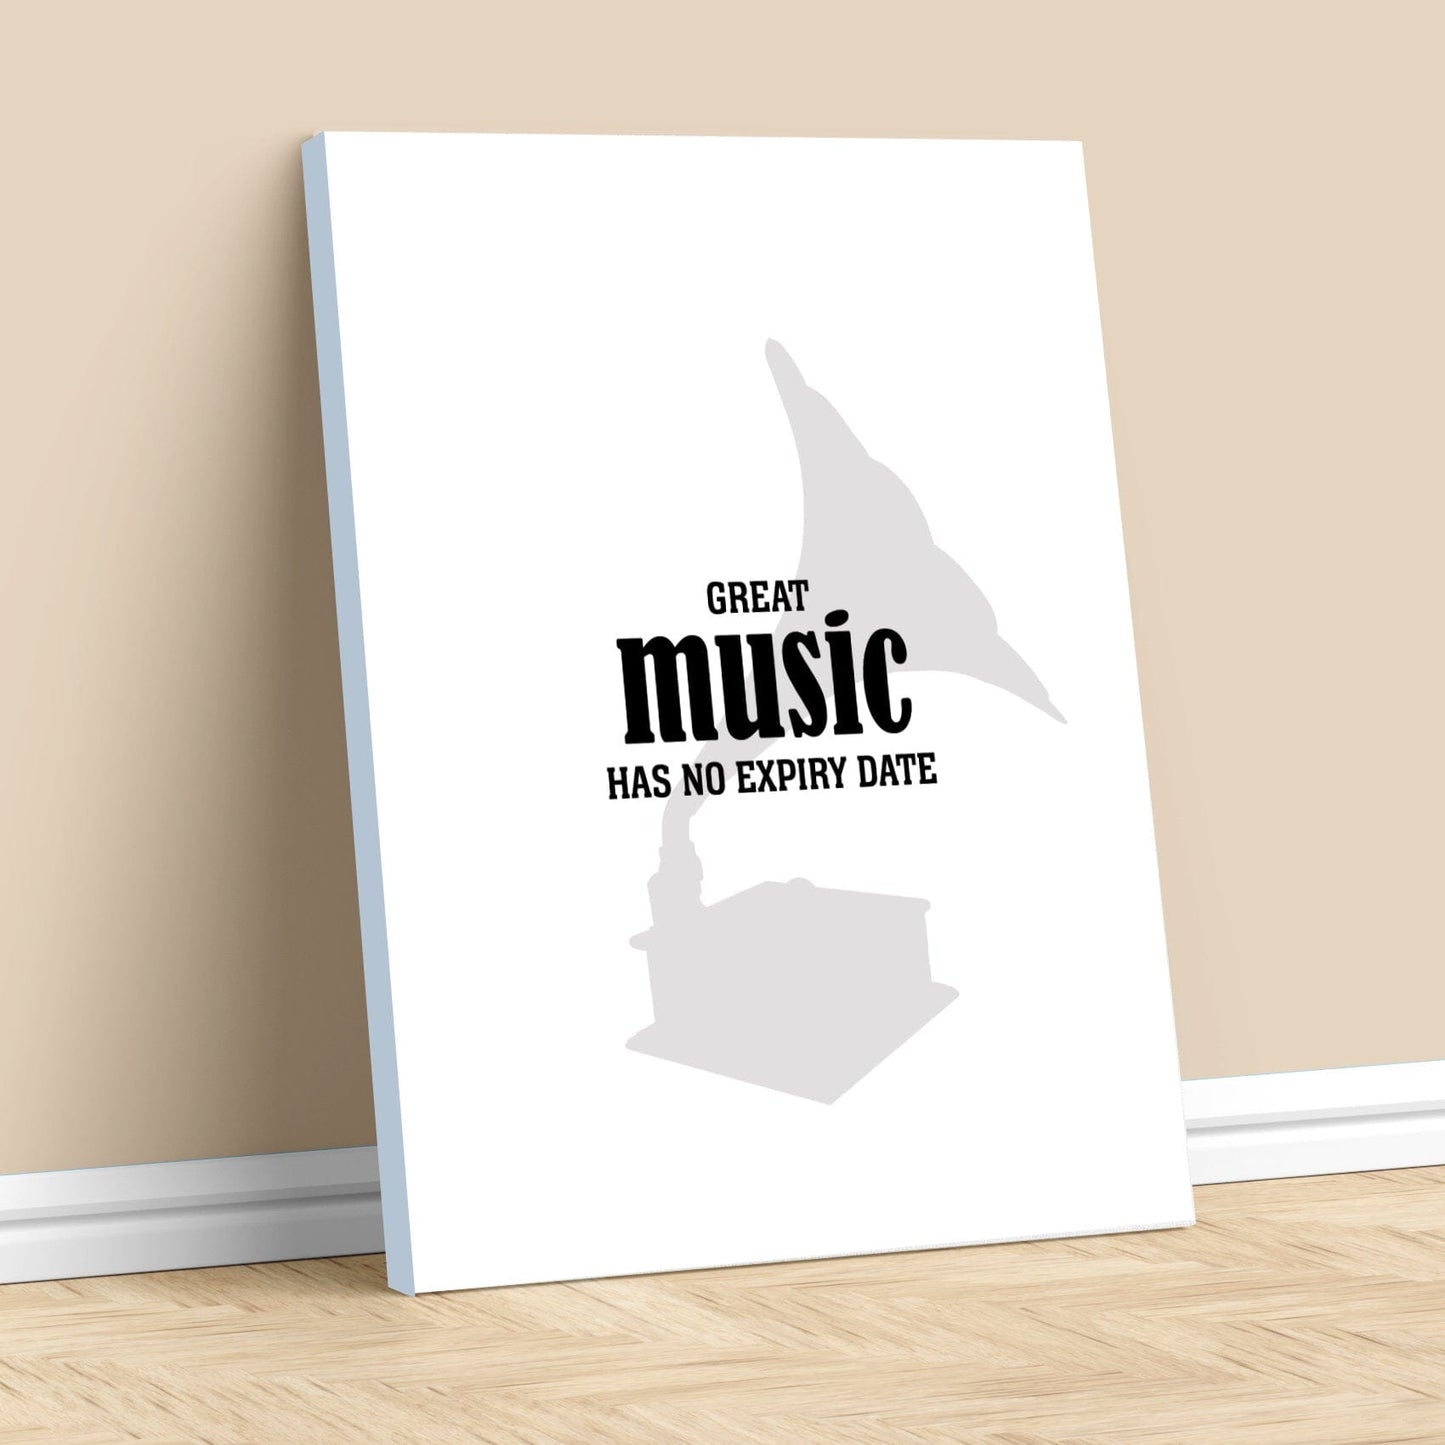 Great Music Has No Expiry Date - Wise and Witty Art Wise and Wiseass Quotes Song Lyrics Art 11x14 Canvas Wrap 